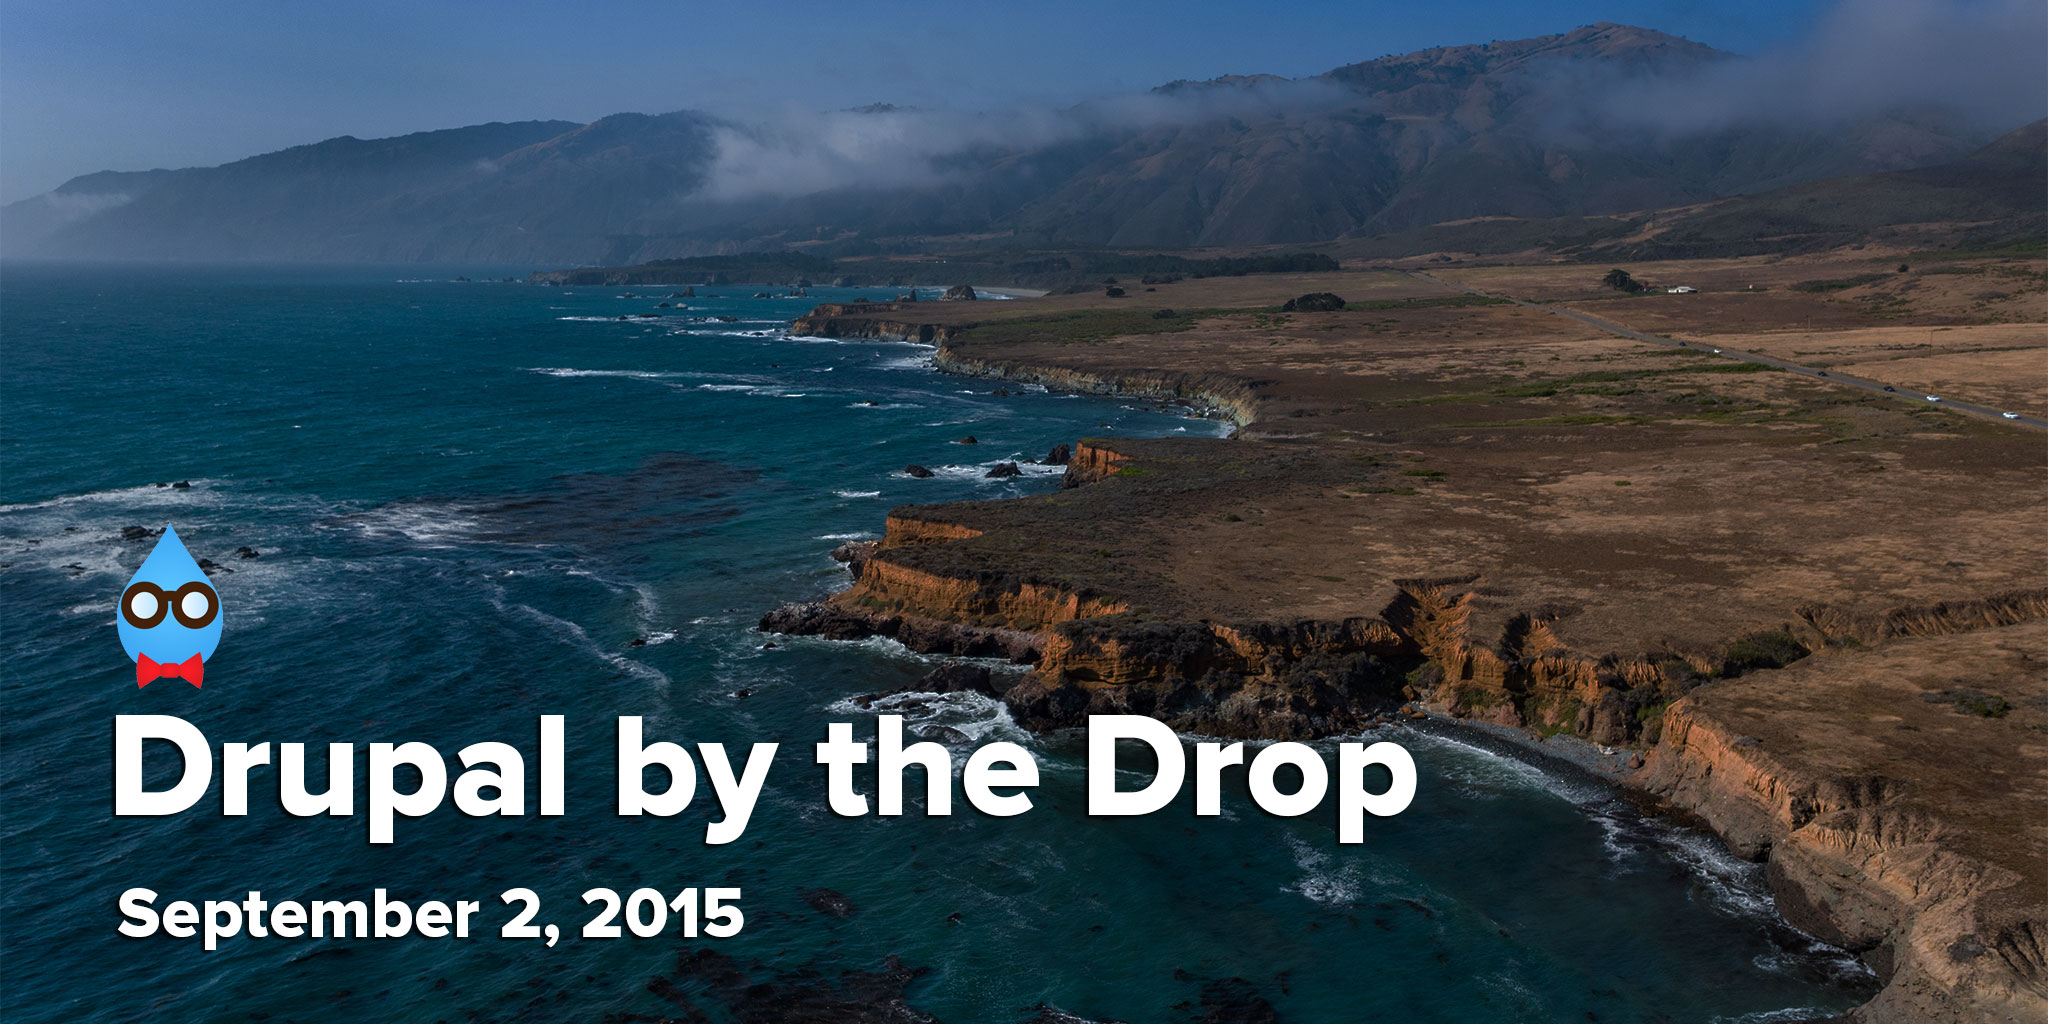 Drupal by the Drop: September 2, 2015